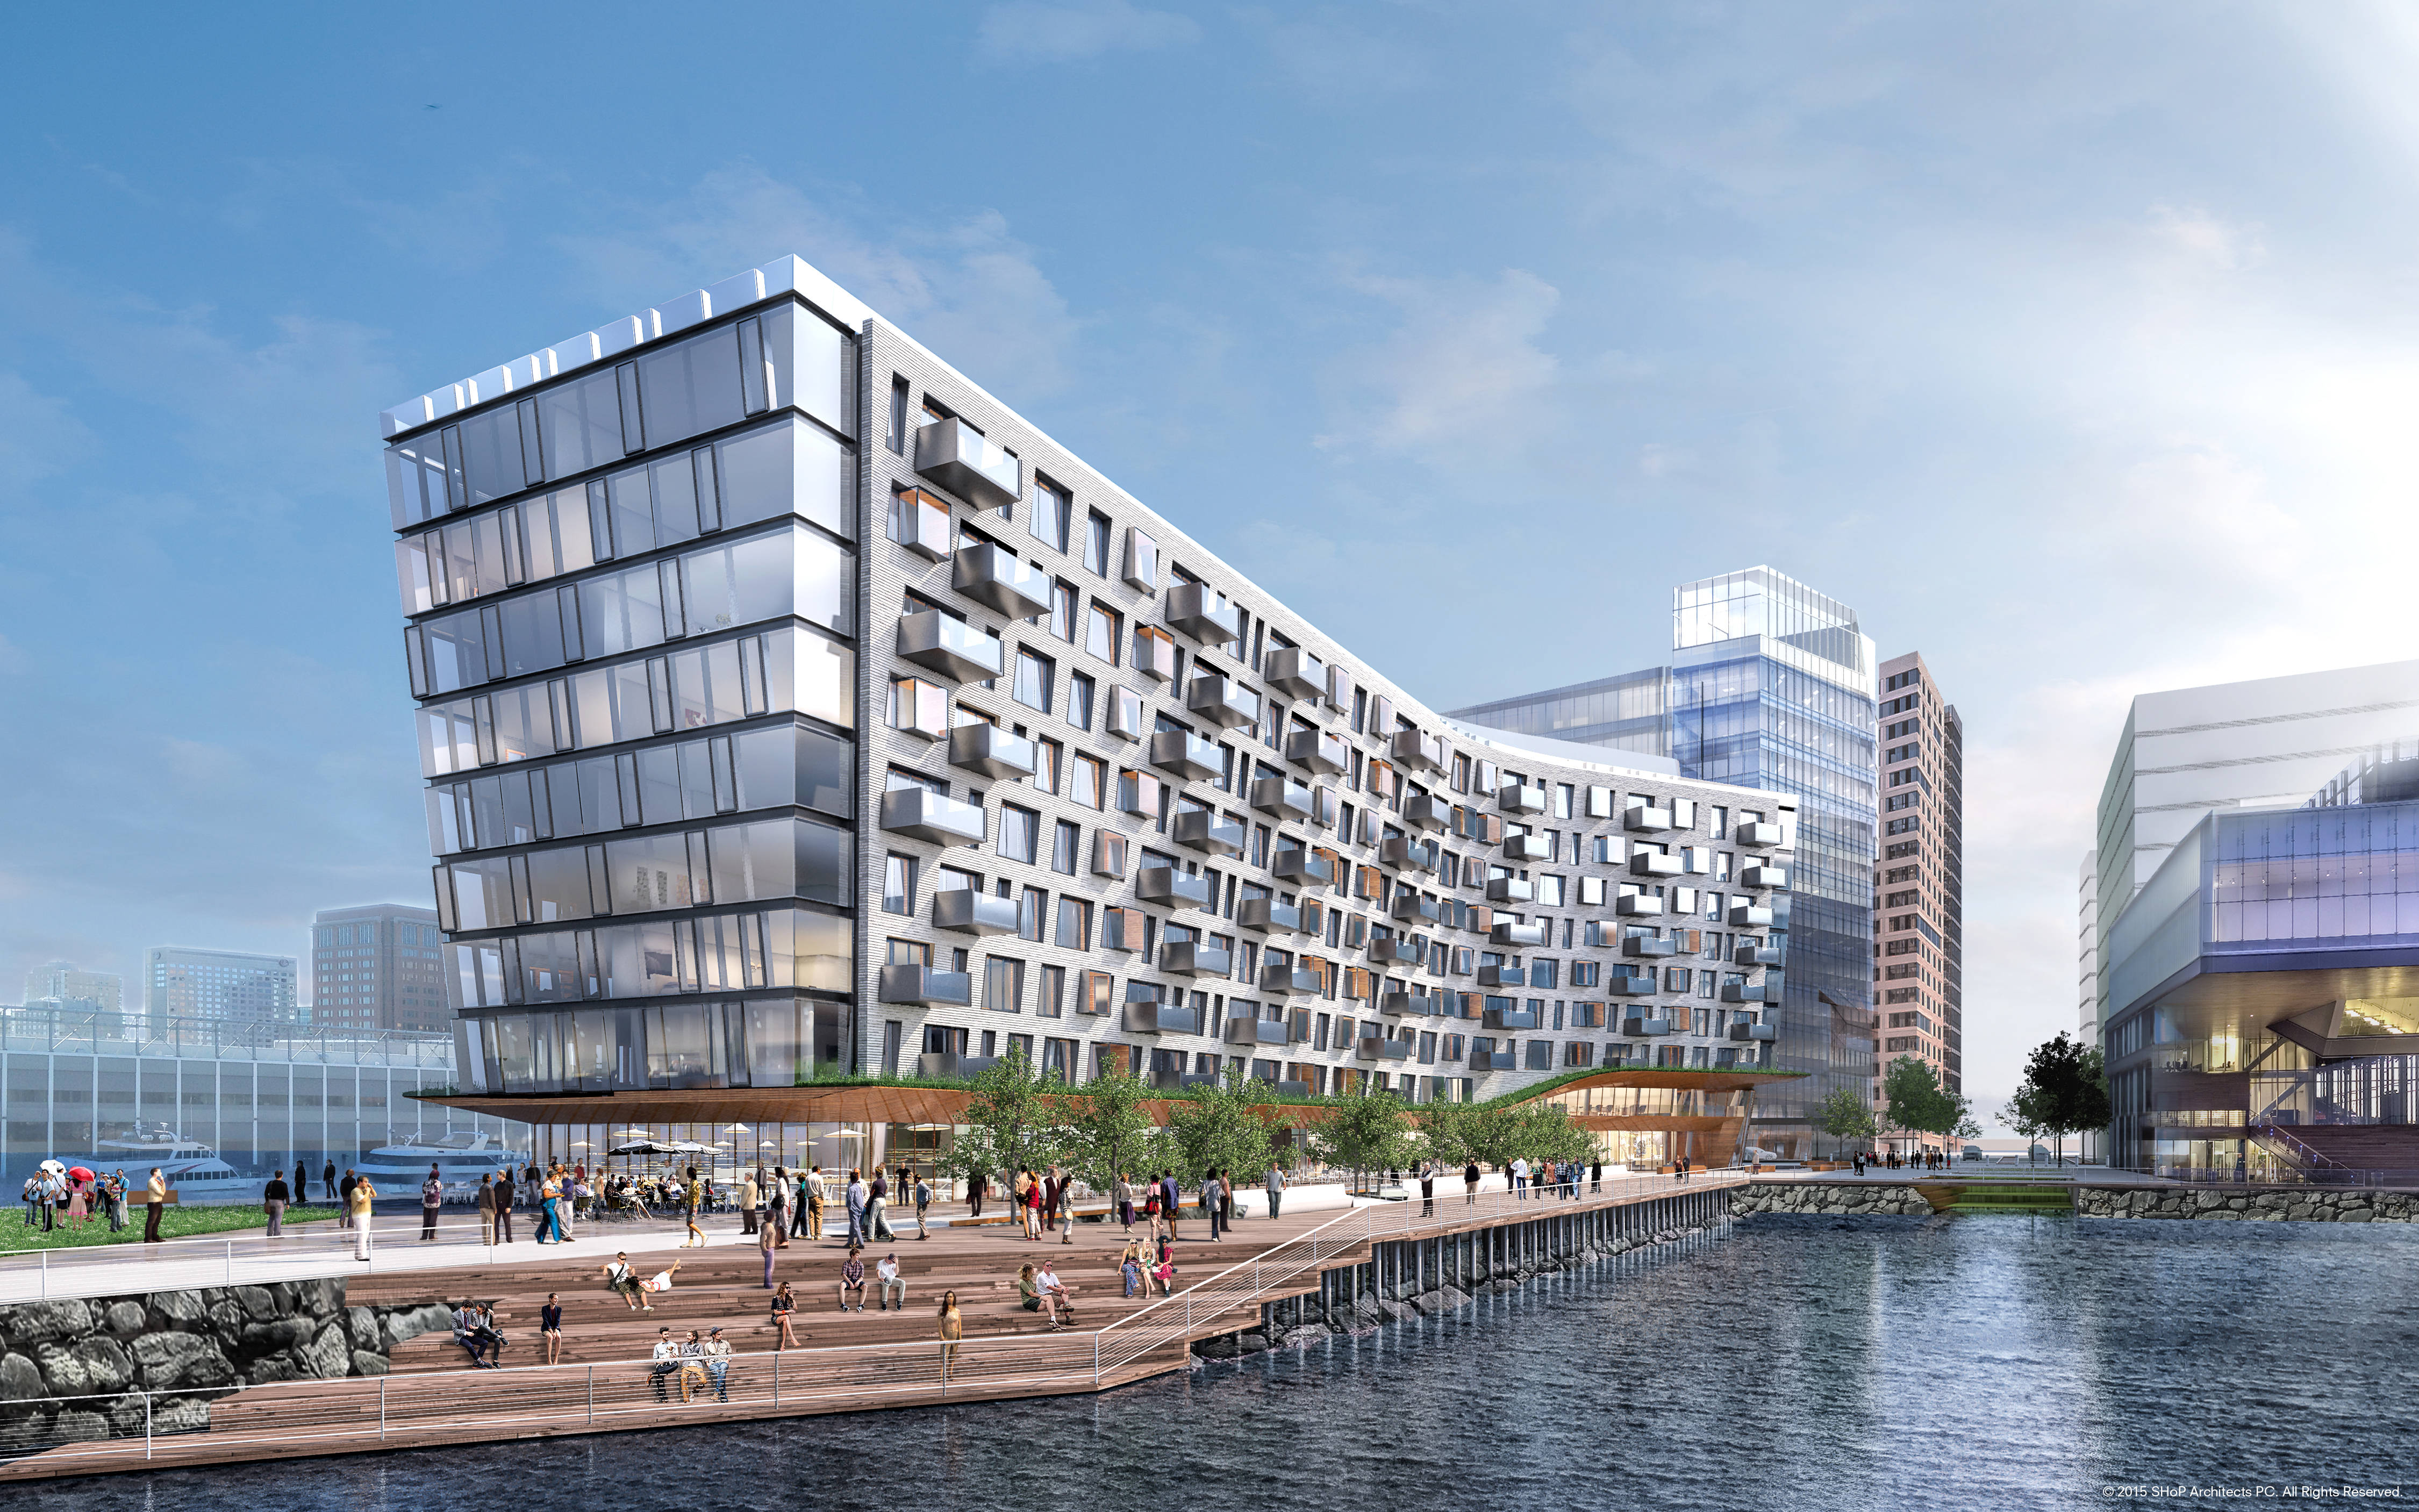 Insider Scoop on Pier 4: 106 New Luxury Condos Coming to Seaport